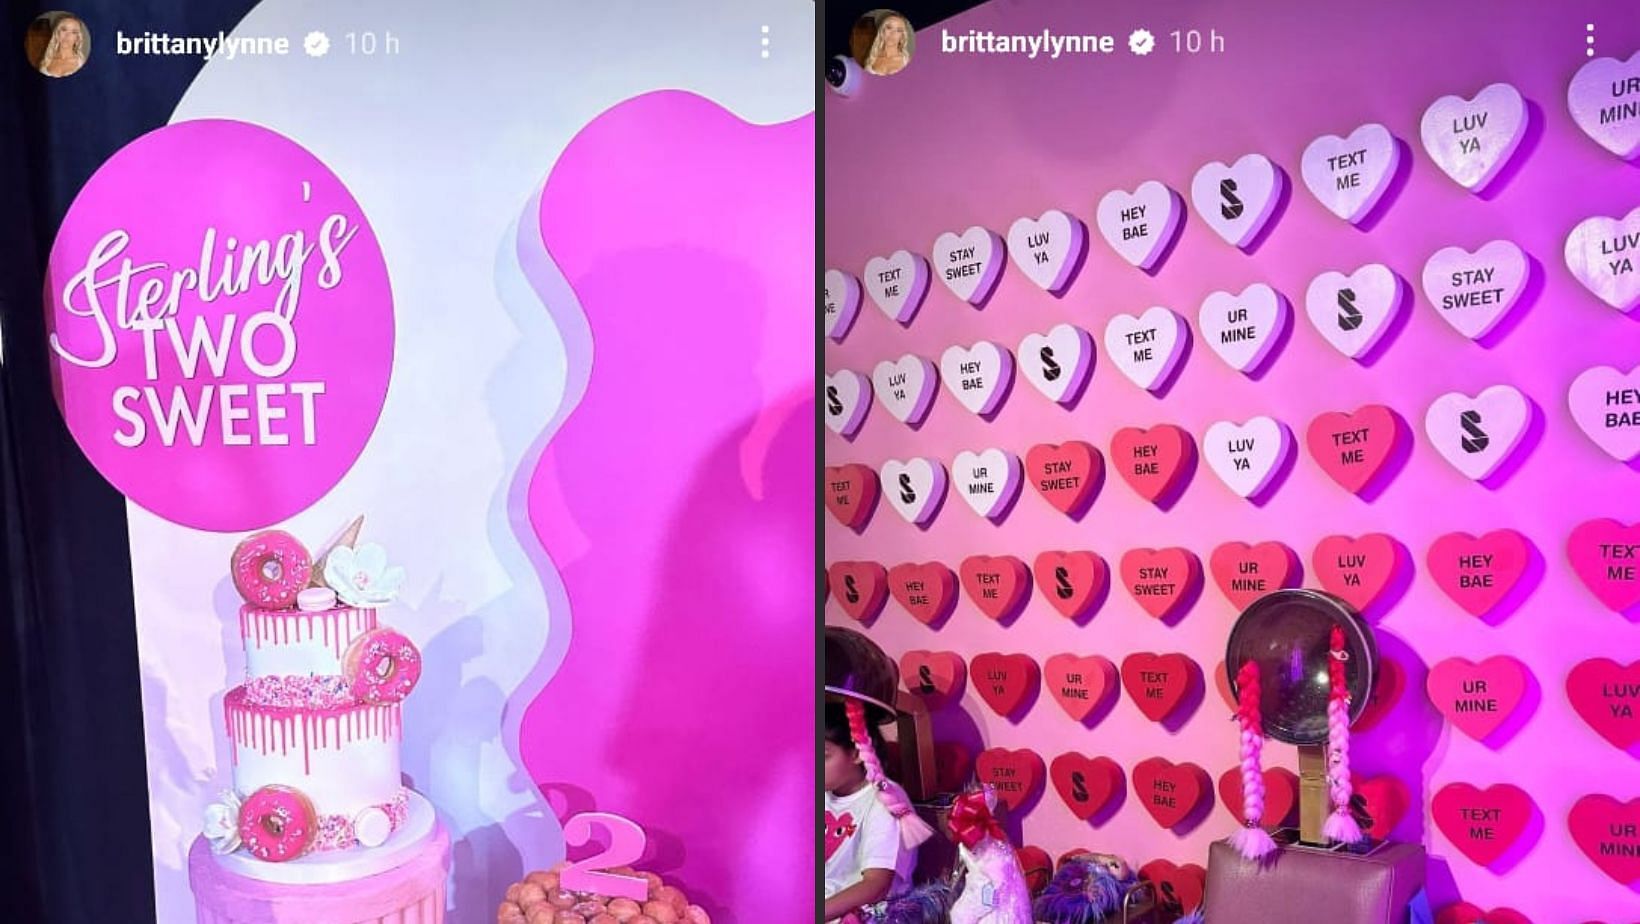 Brittany Mahomes' sneak peek into daughter's second birthday